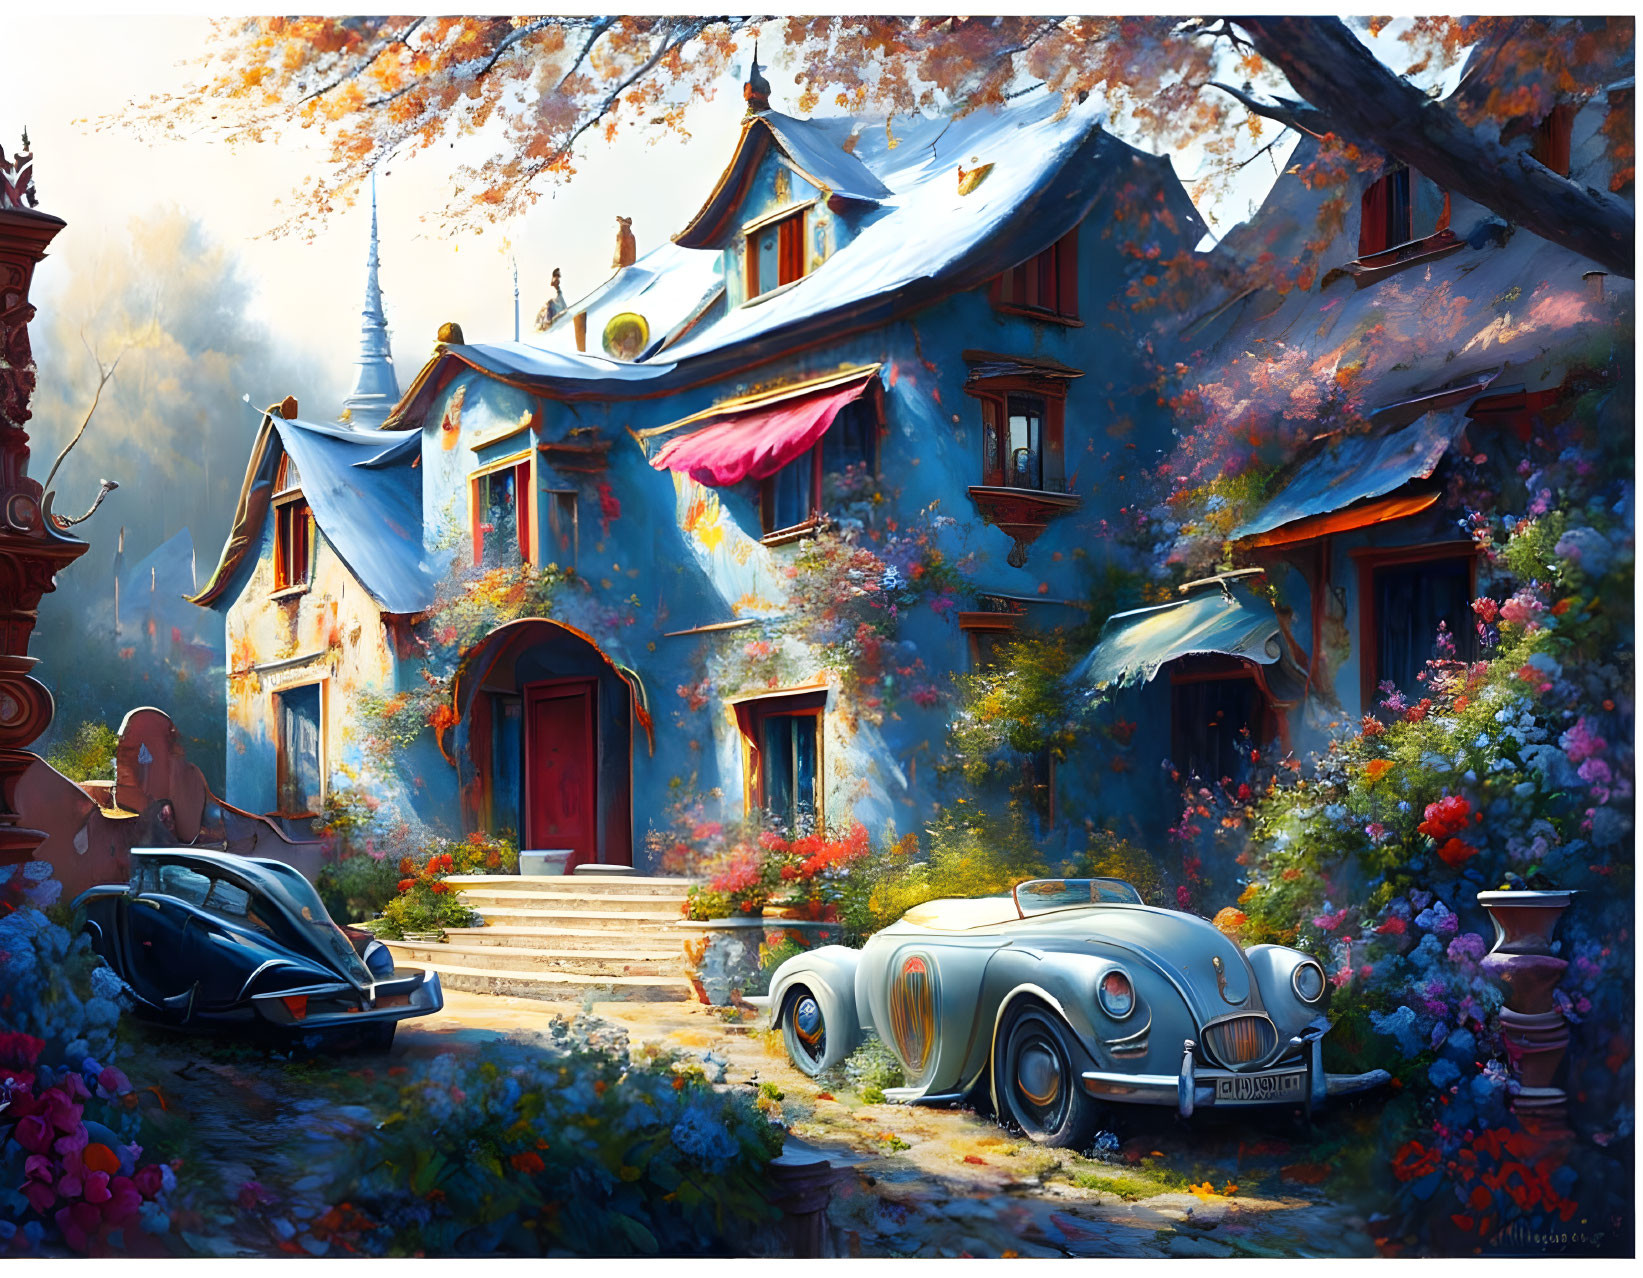 Tranquil scene with classic cars parked outside a blue house